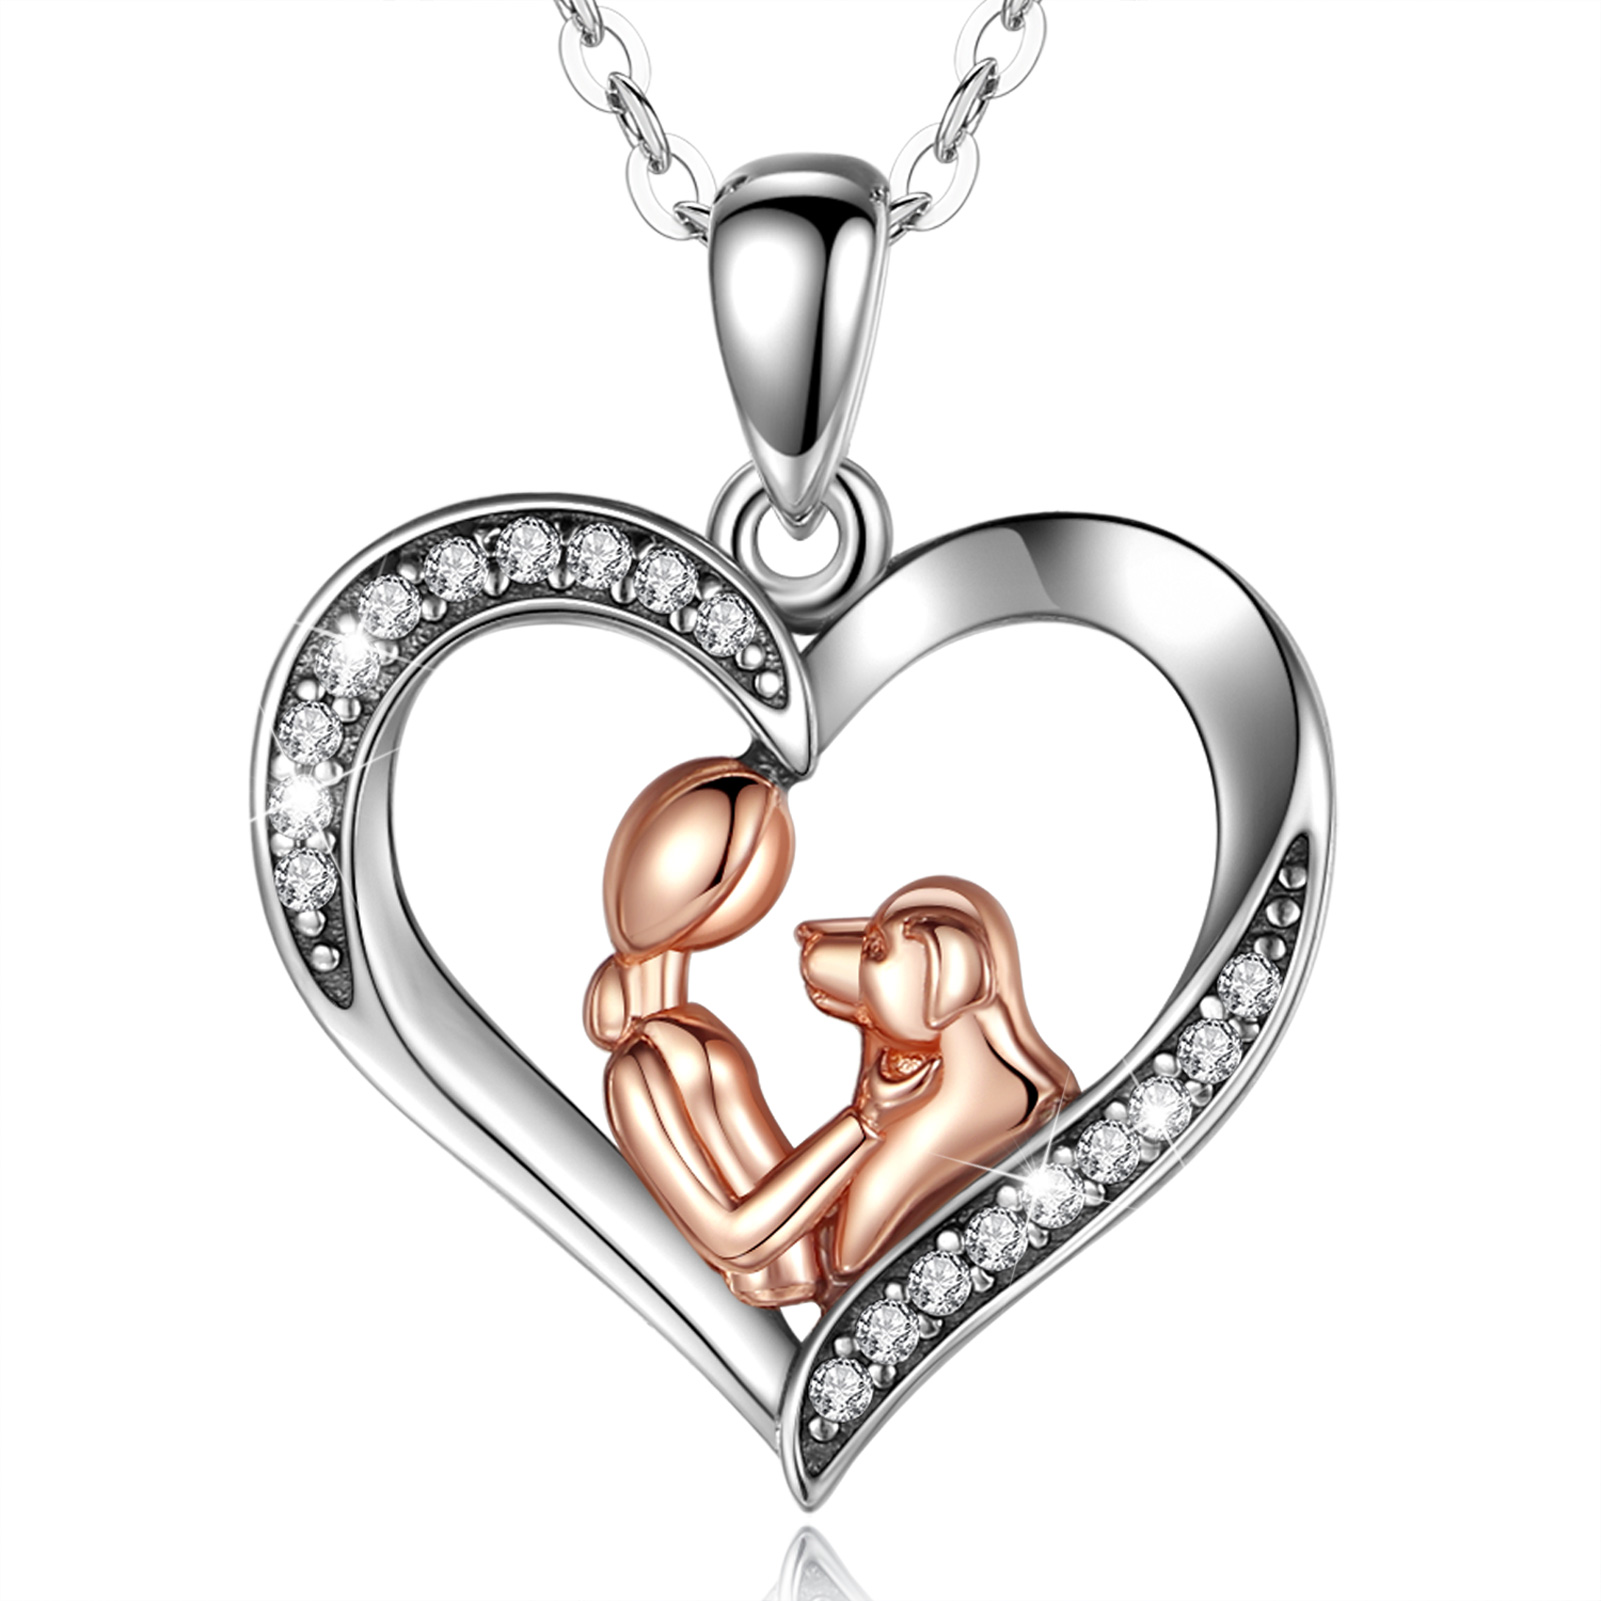 Merryshine Jewelry S925 Sterling Silver and Cubic Zirconia Dog Lovers Heart Necklace for Girls